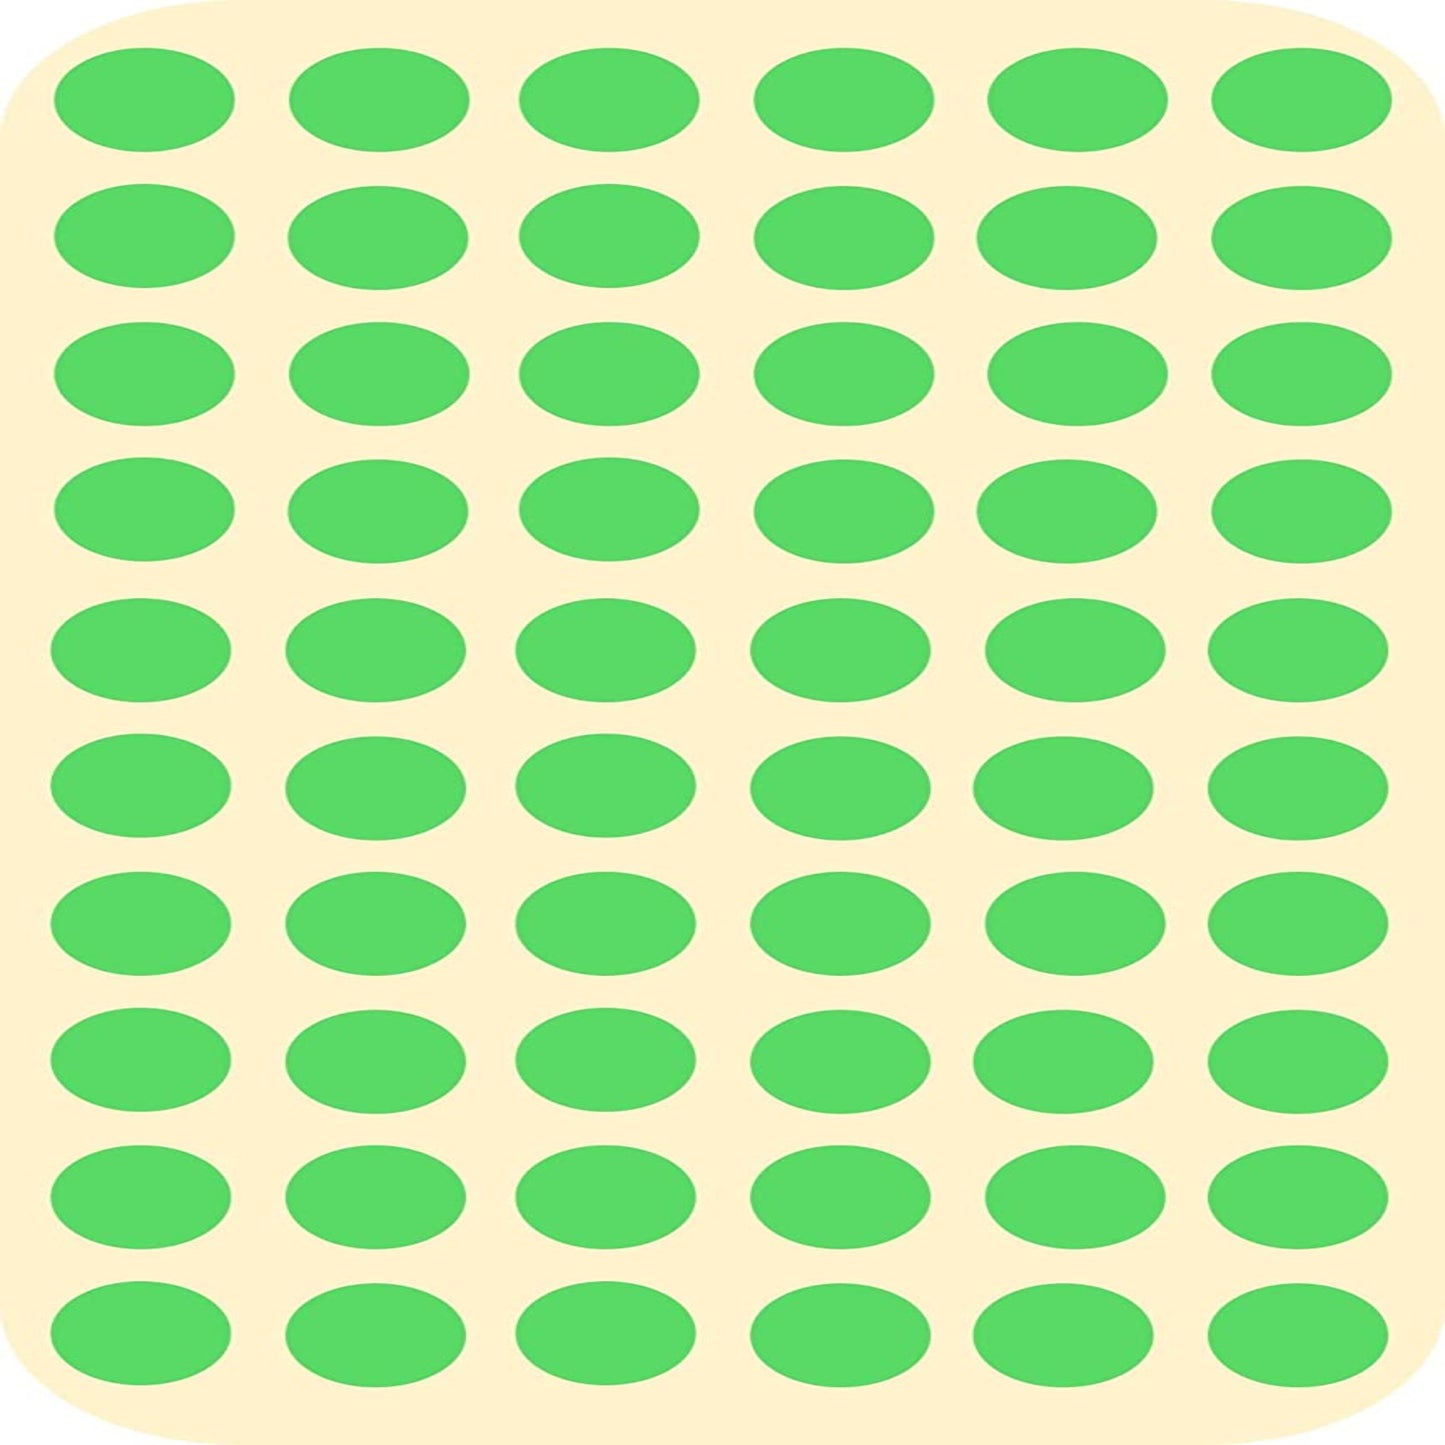 AccuPrints Green(L)Coloured Round Dots 10-mm or 1 cm or 0.37 inch Stickers for Art and Craft & Games